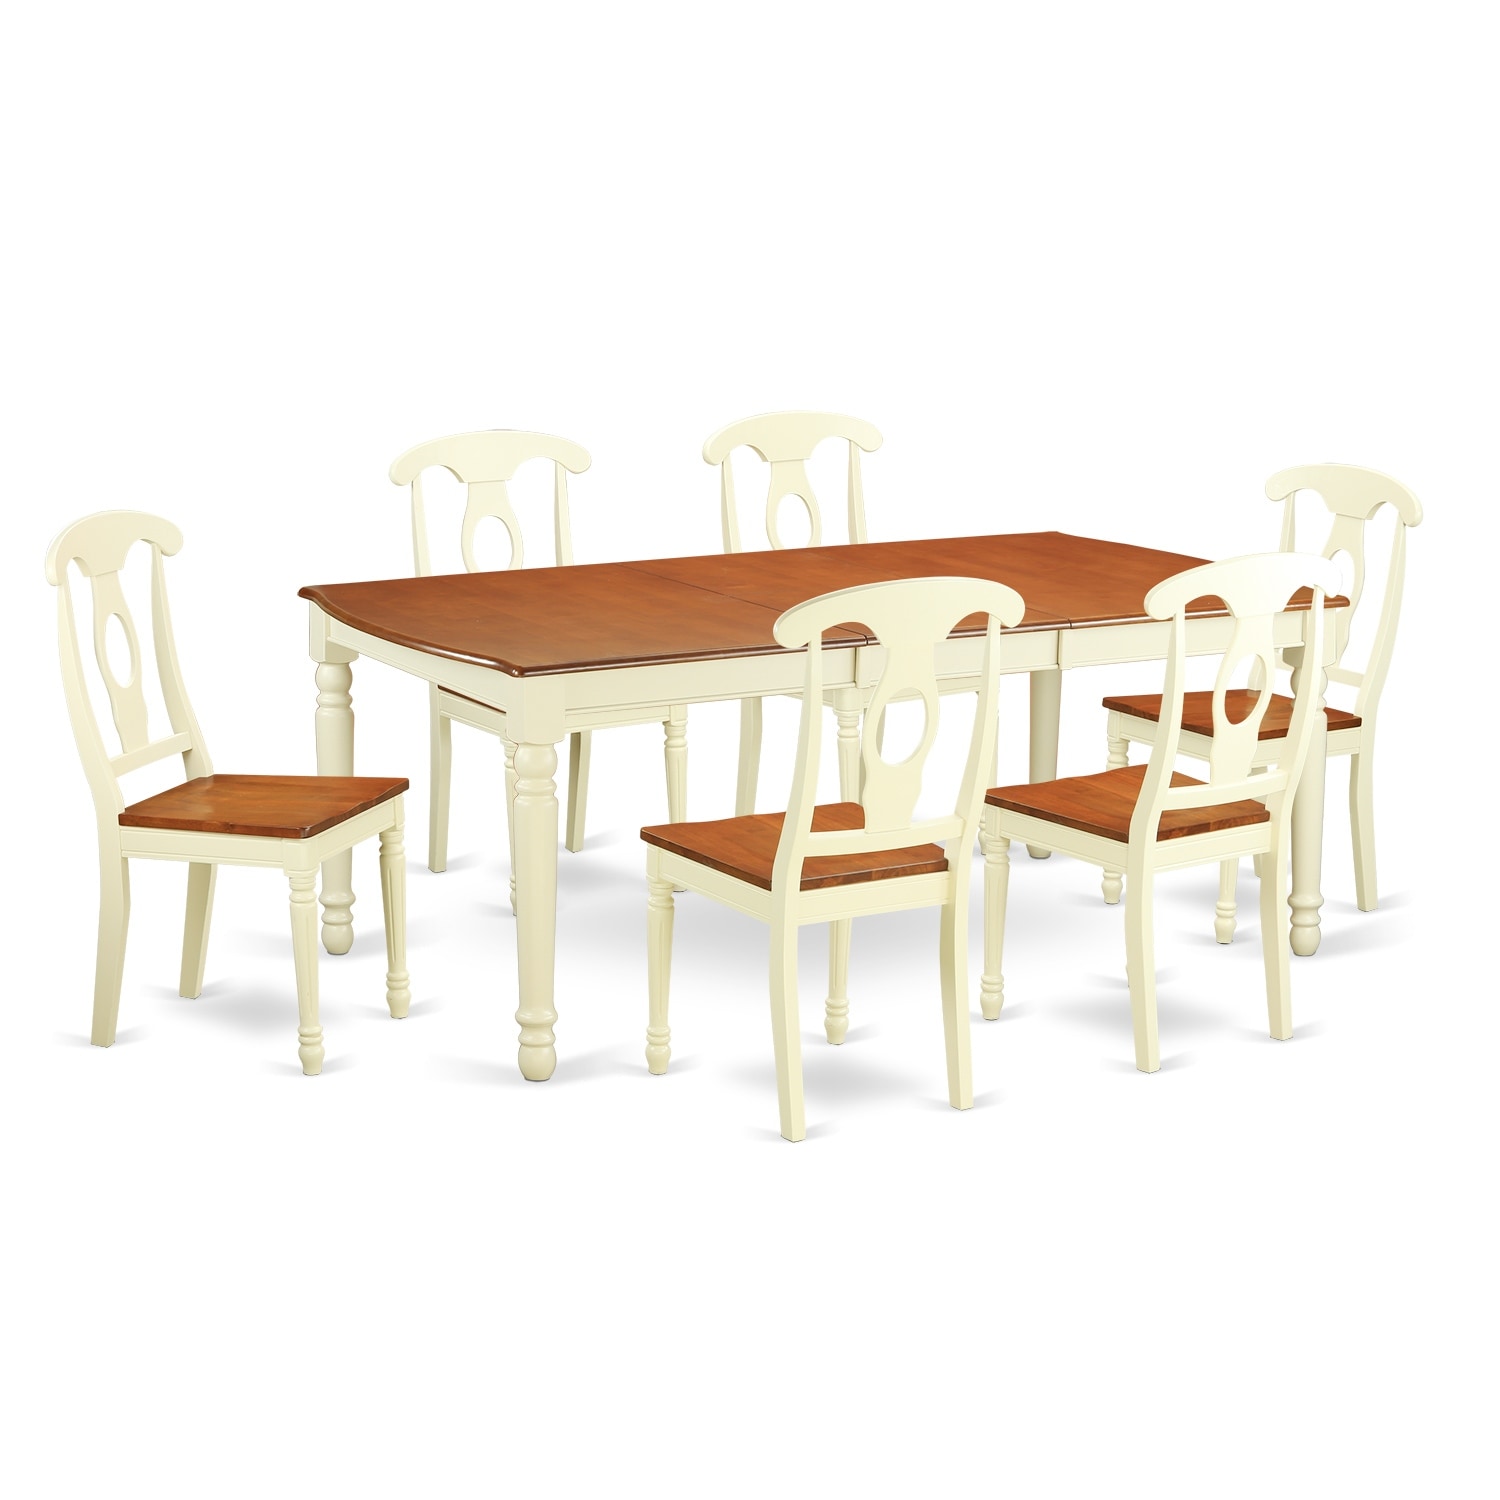 East West Furniture Piece Kitchen Table Set- a Rectangle Dining Table and  Solid Wood Seat Chairs, Buttermilk  Cherry On Sale Bed Bath  Beyond  12027422